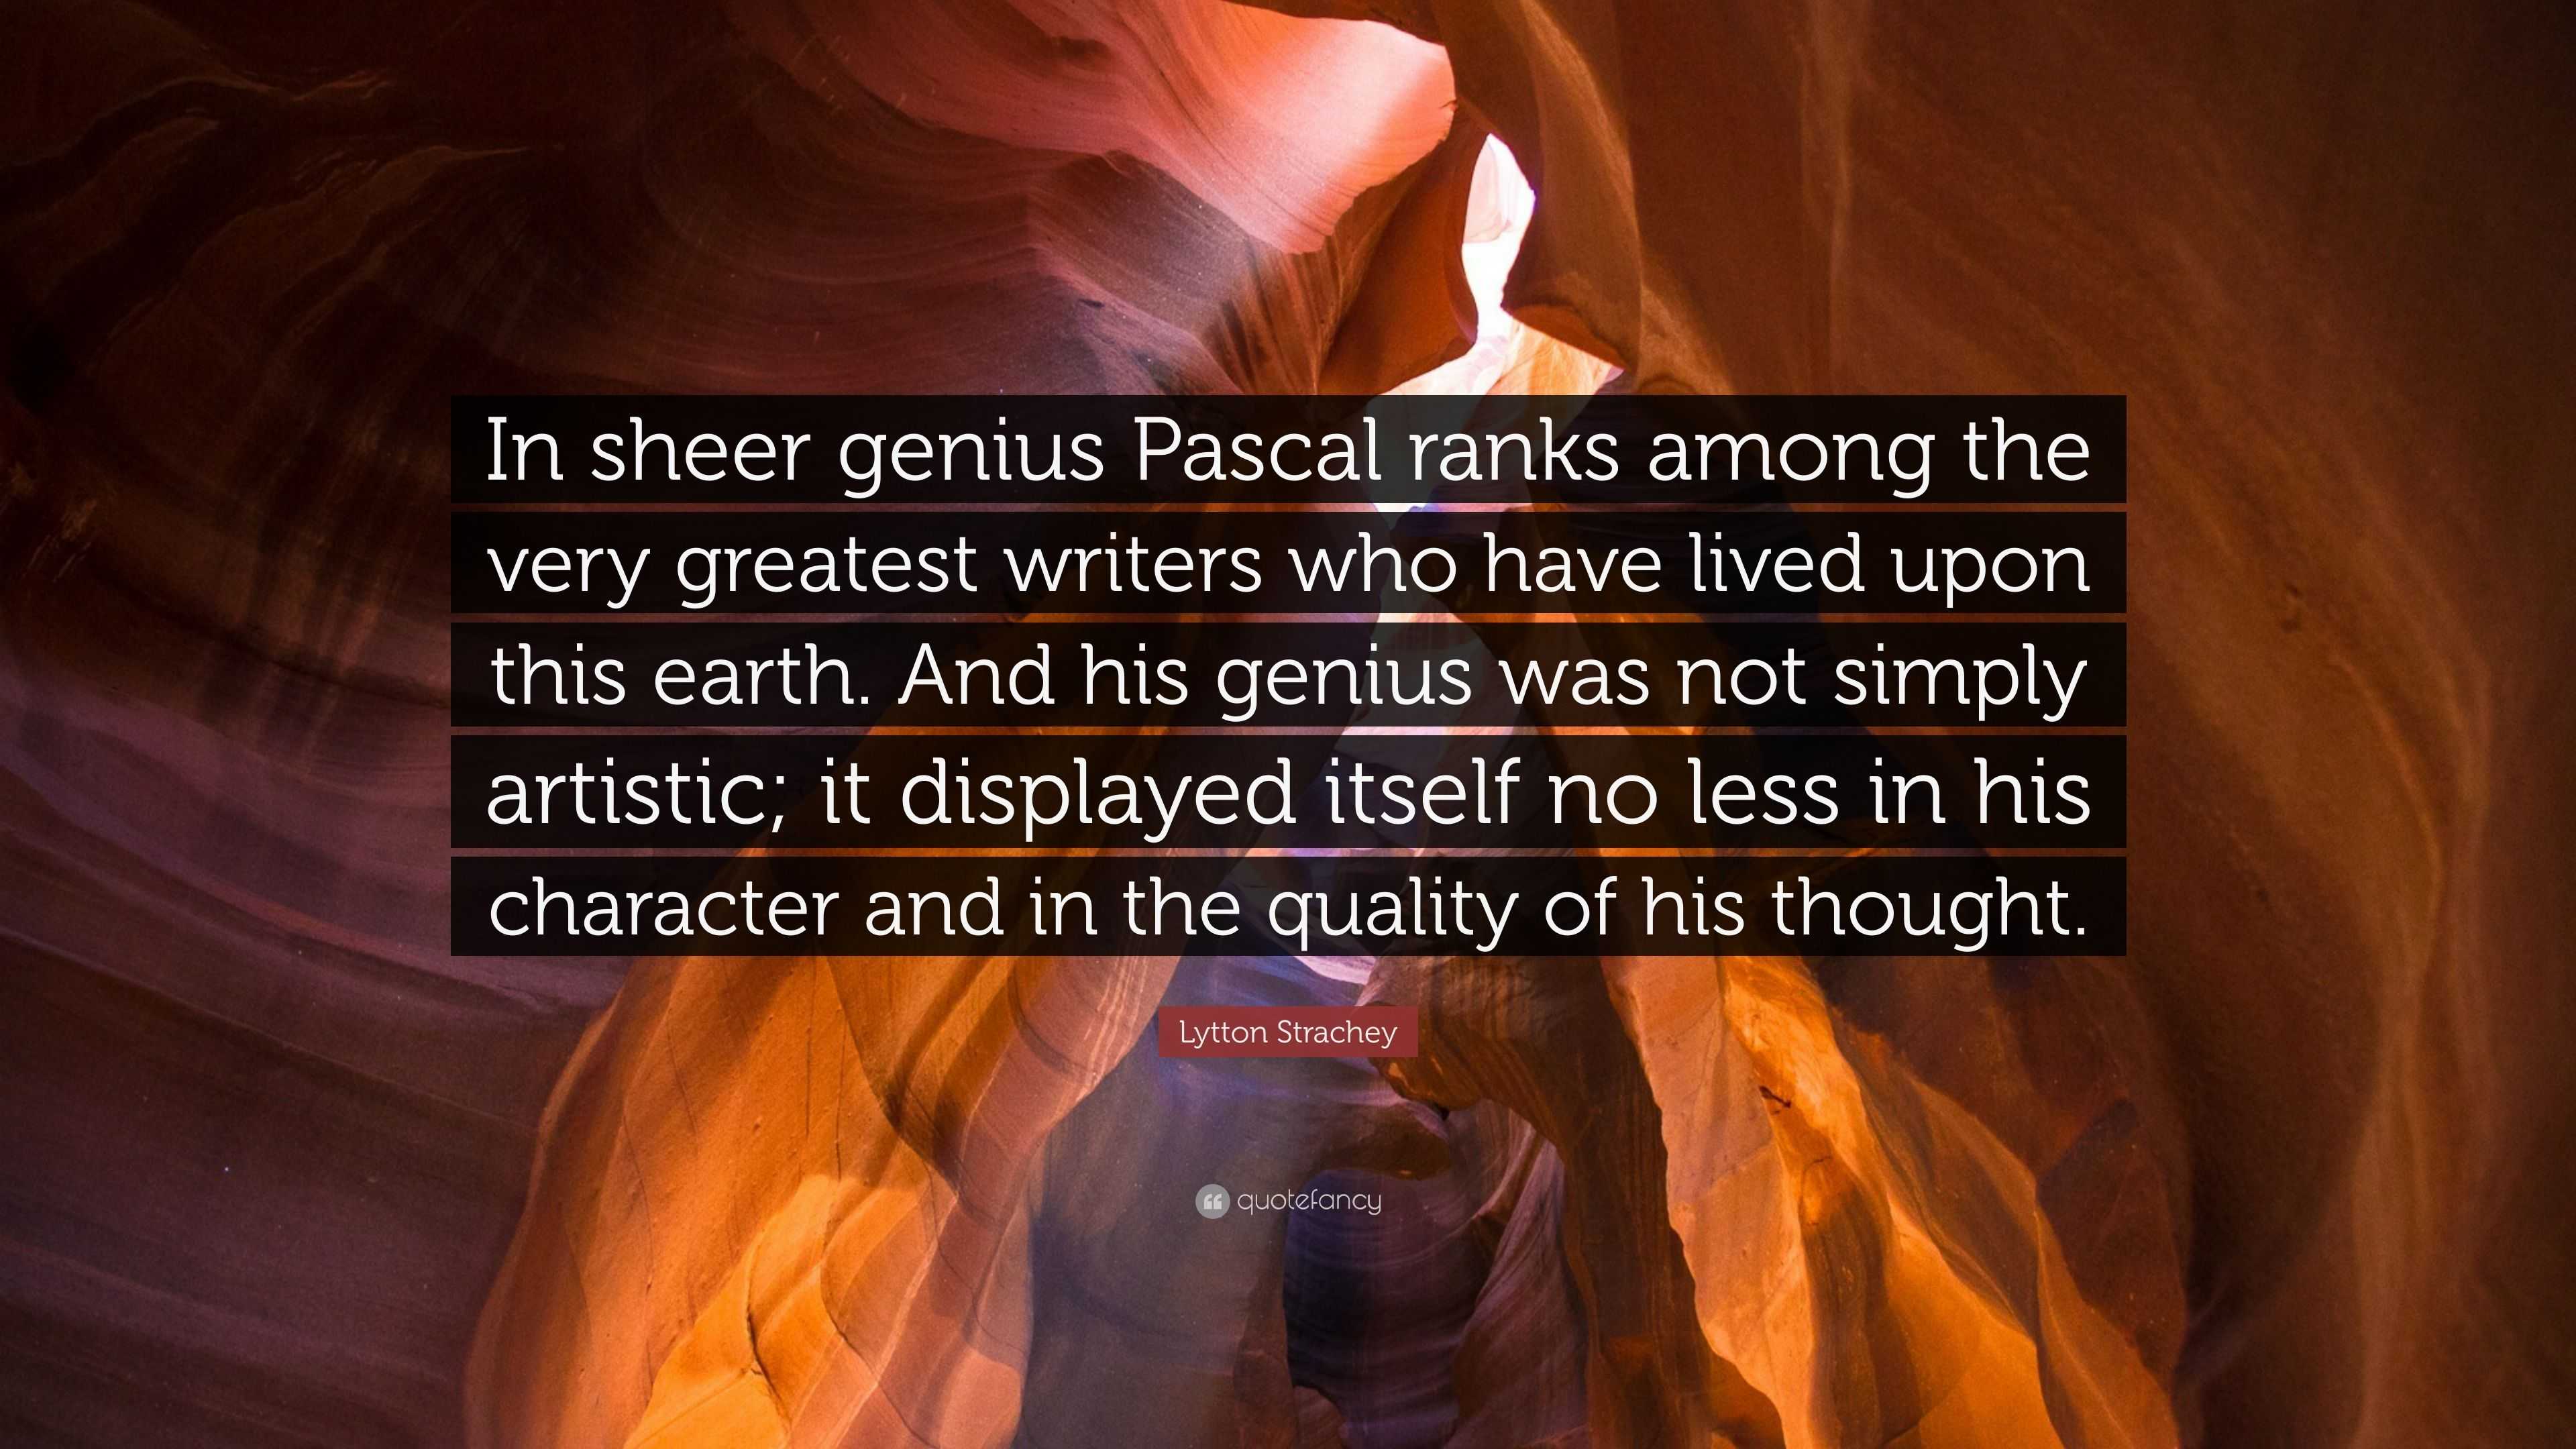 Lytton Strachey Quote: “In sheer genius Pascal ranks among the very  greatest writers who have lived upon this earth. And his genius was not  simp”